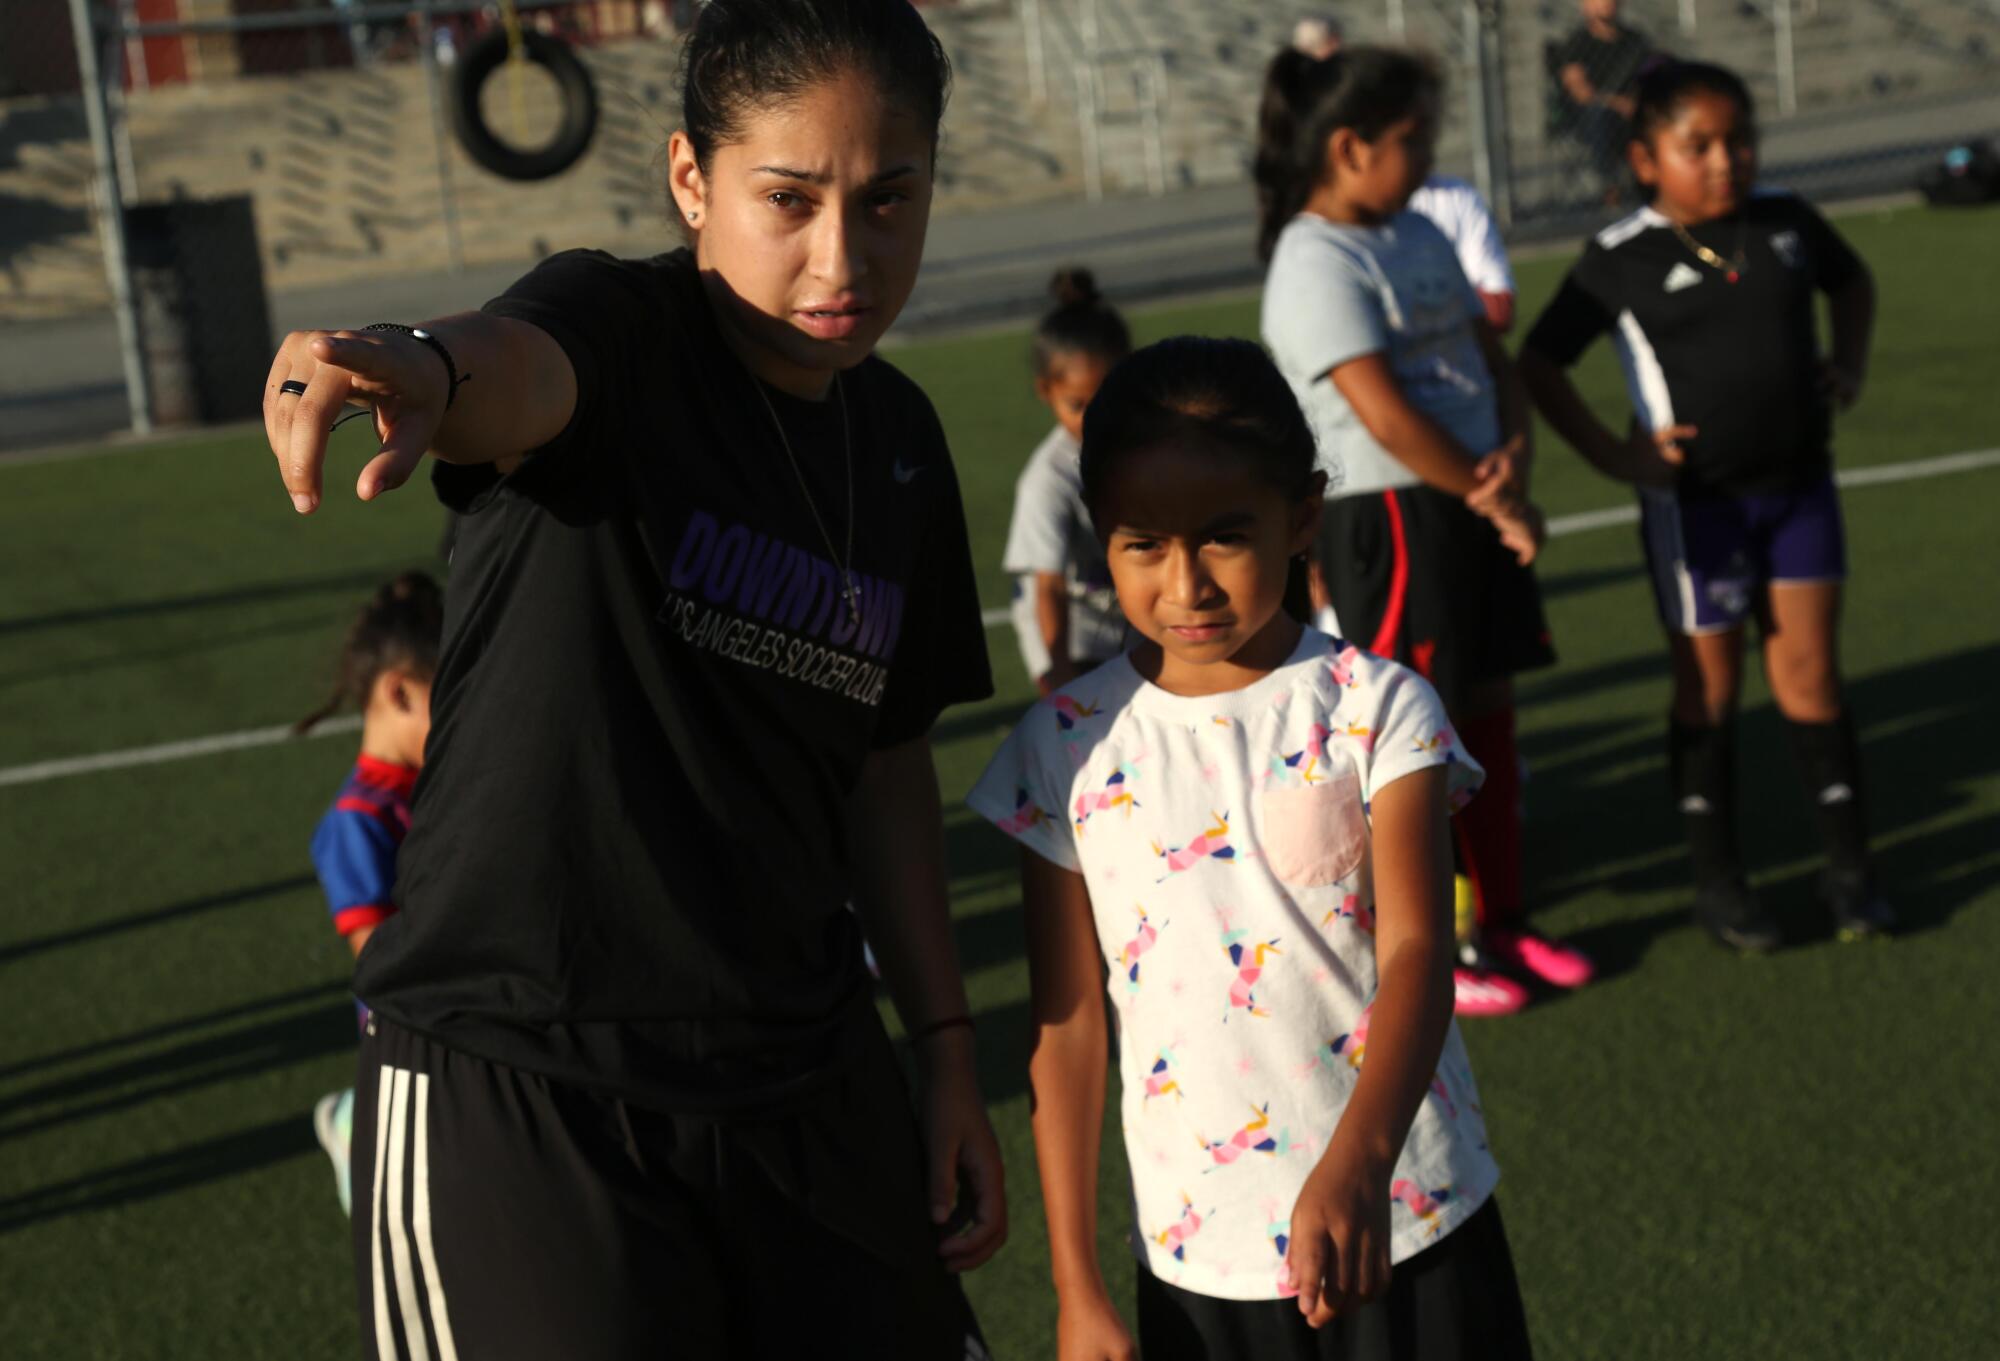 Nayelli Barahona points and gives directions to a young girl during a Downtown L.A. Soccer Club practice.